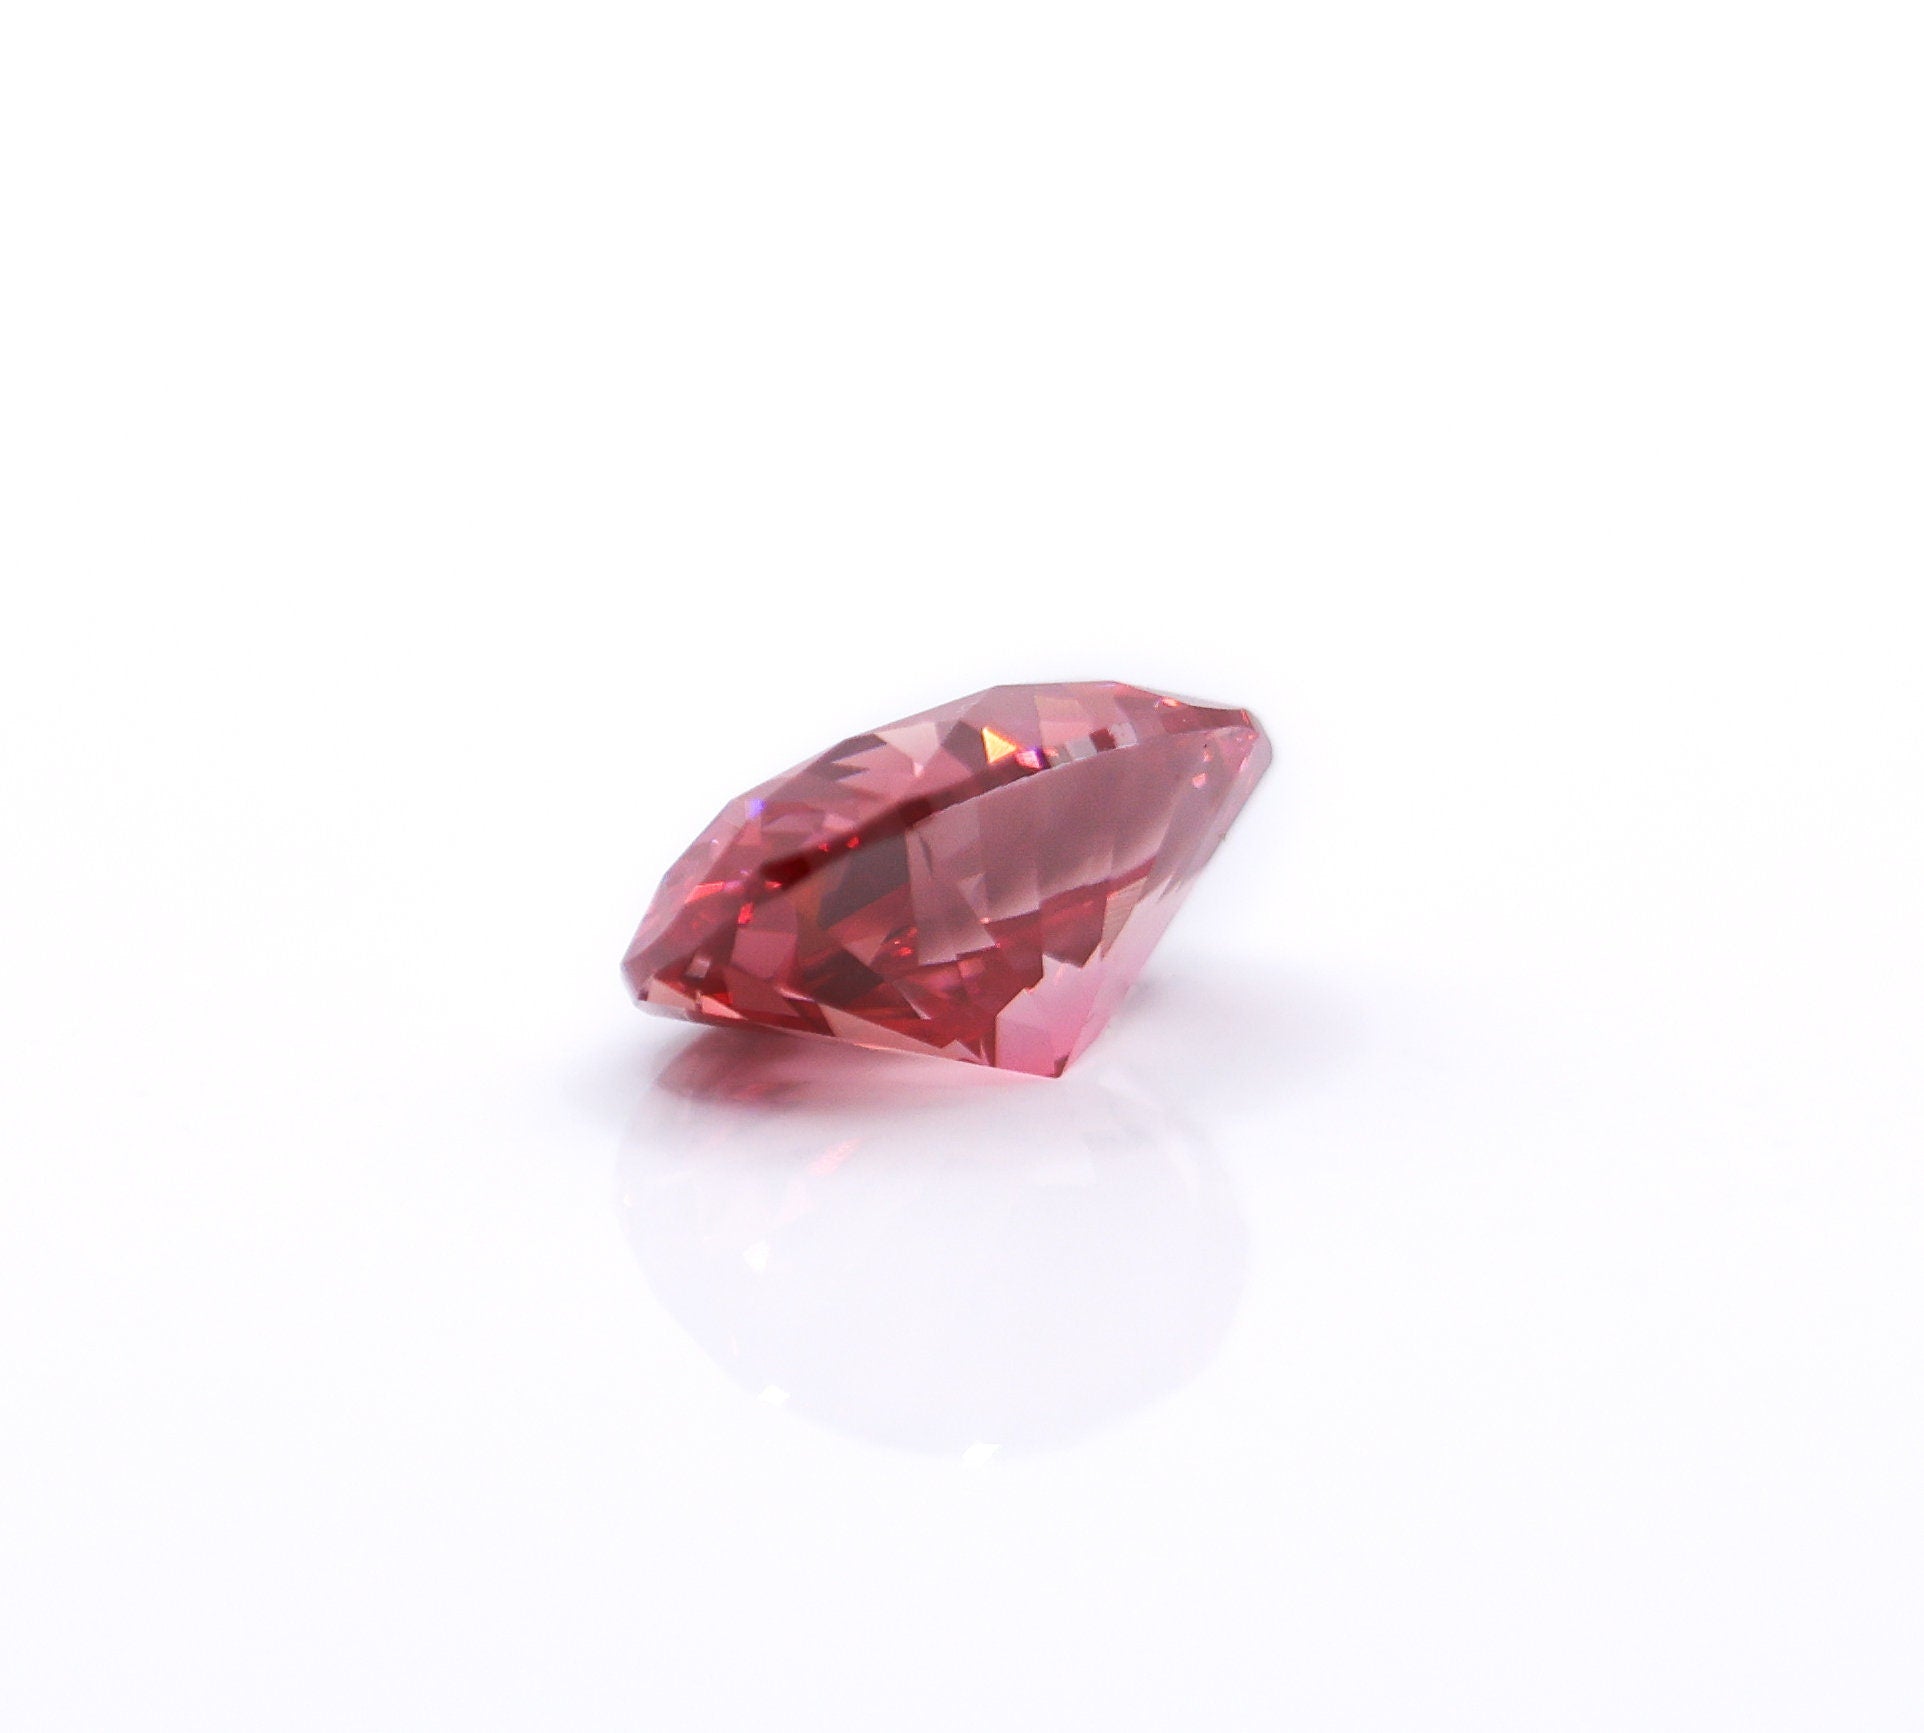 Gemstones-GIA Certified VVS1 Fancy Deep Pink Diamond | Natural Earth Mined | 2.31 Carat | Oval Brilliant | Loose Gemstone | Heirloom Diamond - NNJGemstones